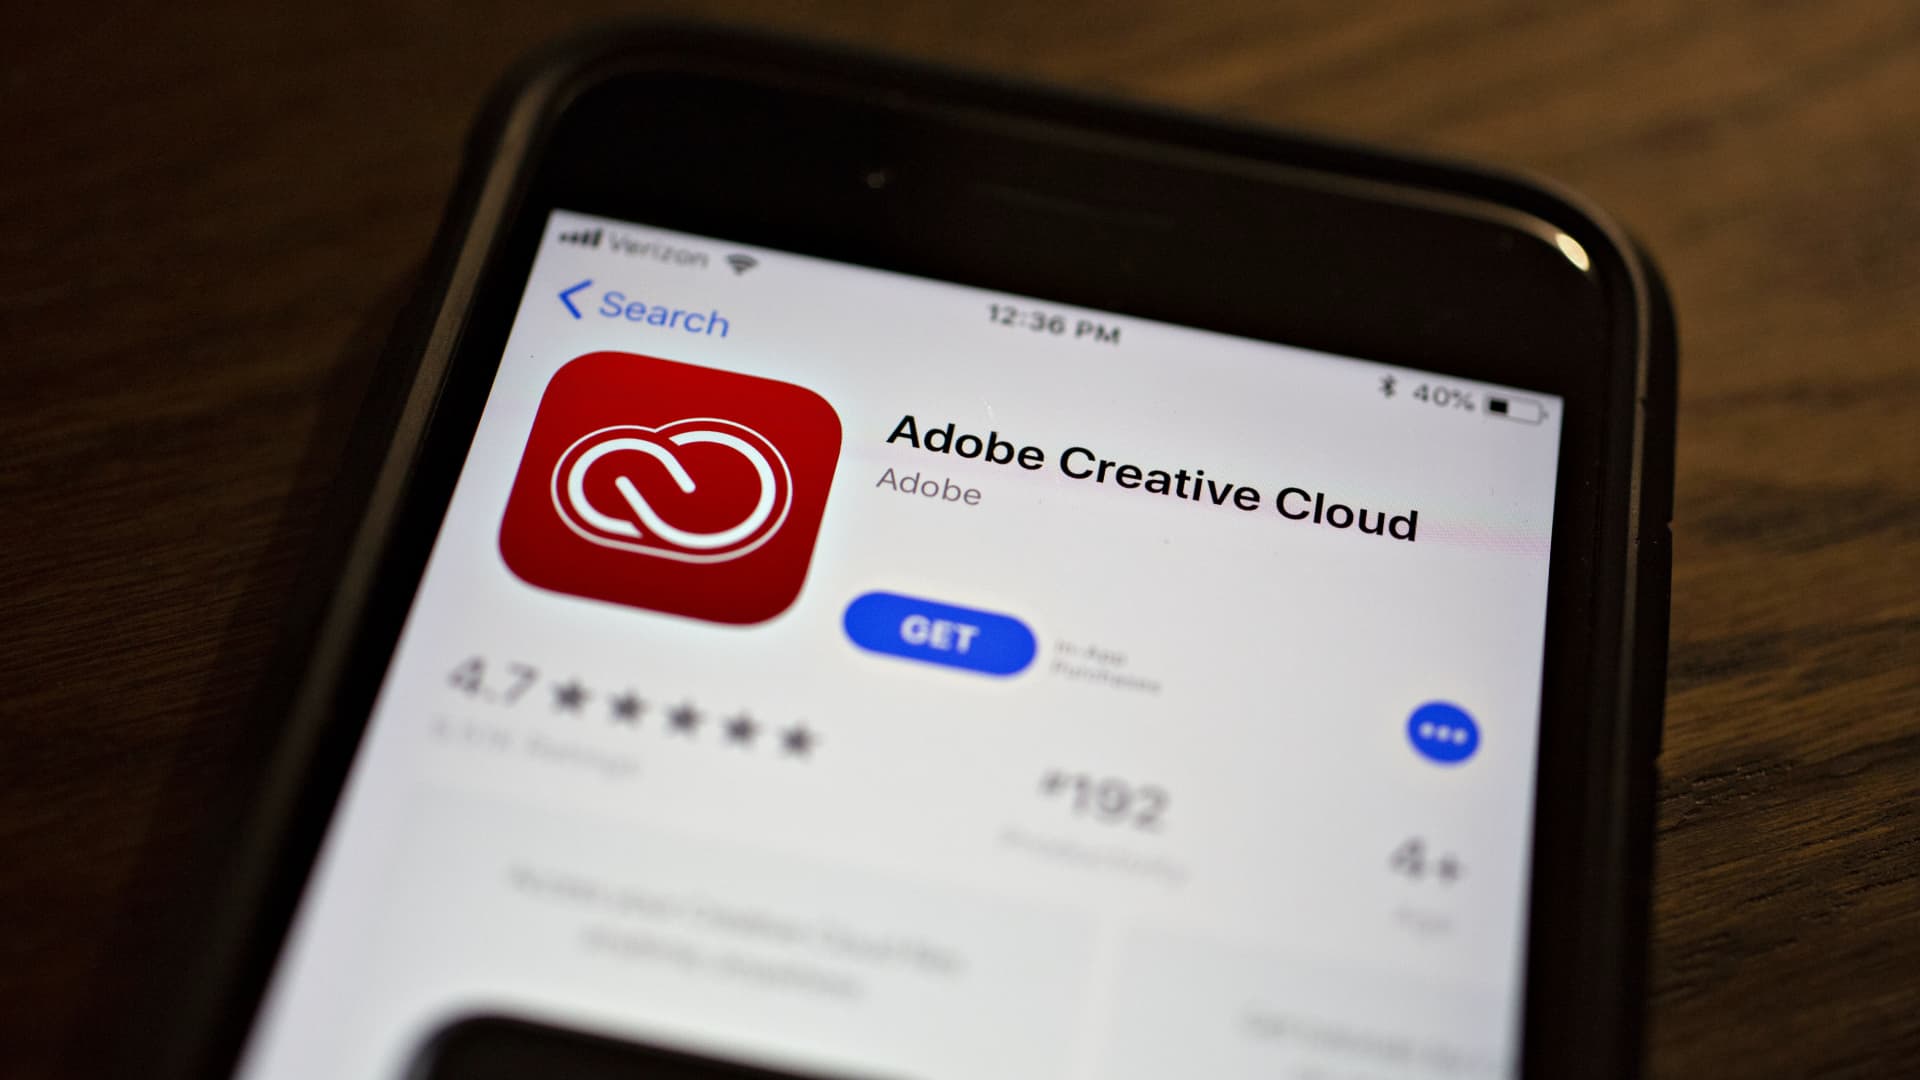 Bank of America downgrades Adobe, says stock is a ‘show me story’ as it awaits clarity on latest acquisition